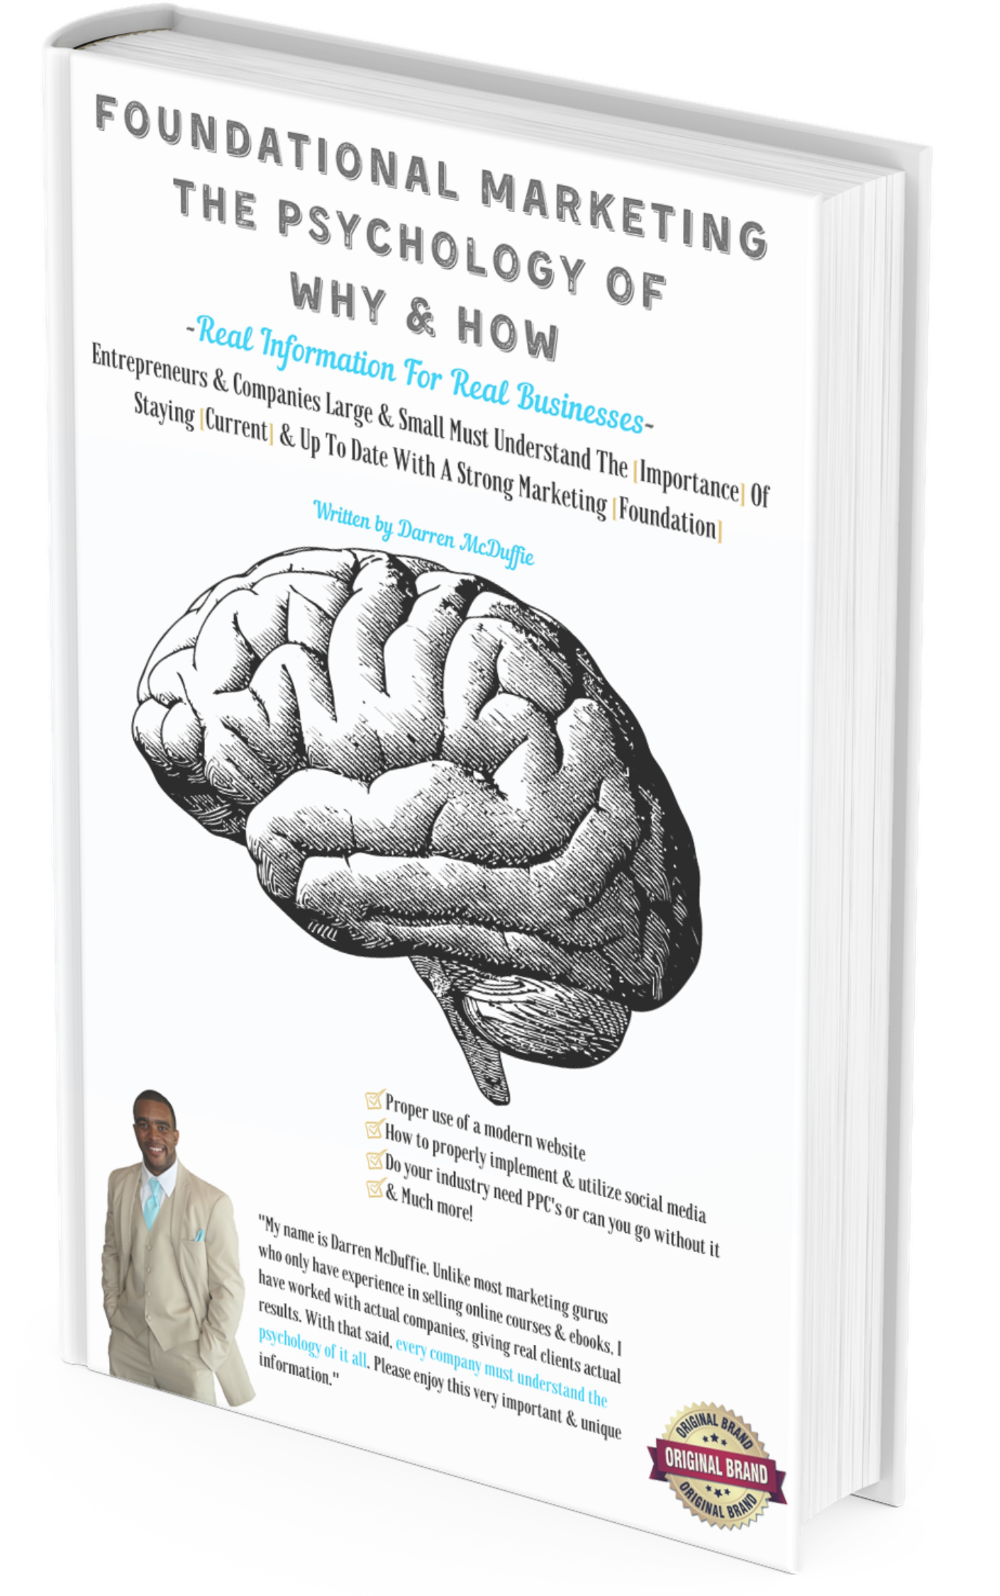 Foundational Marketing The Psychology of Why & How